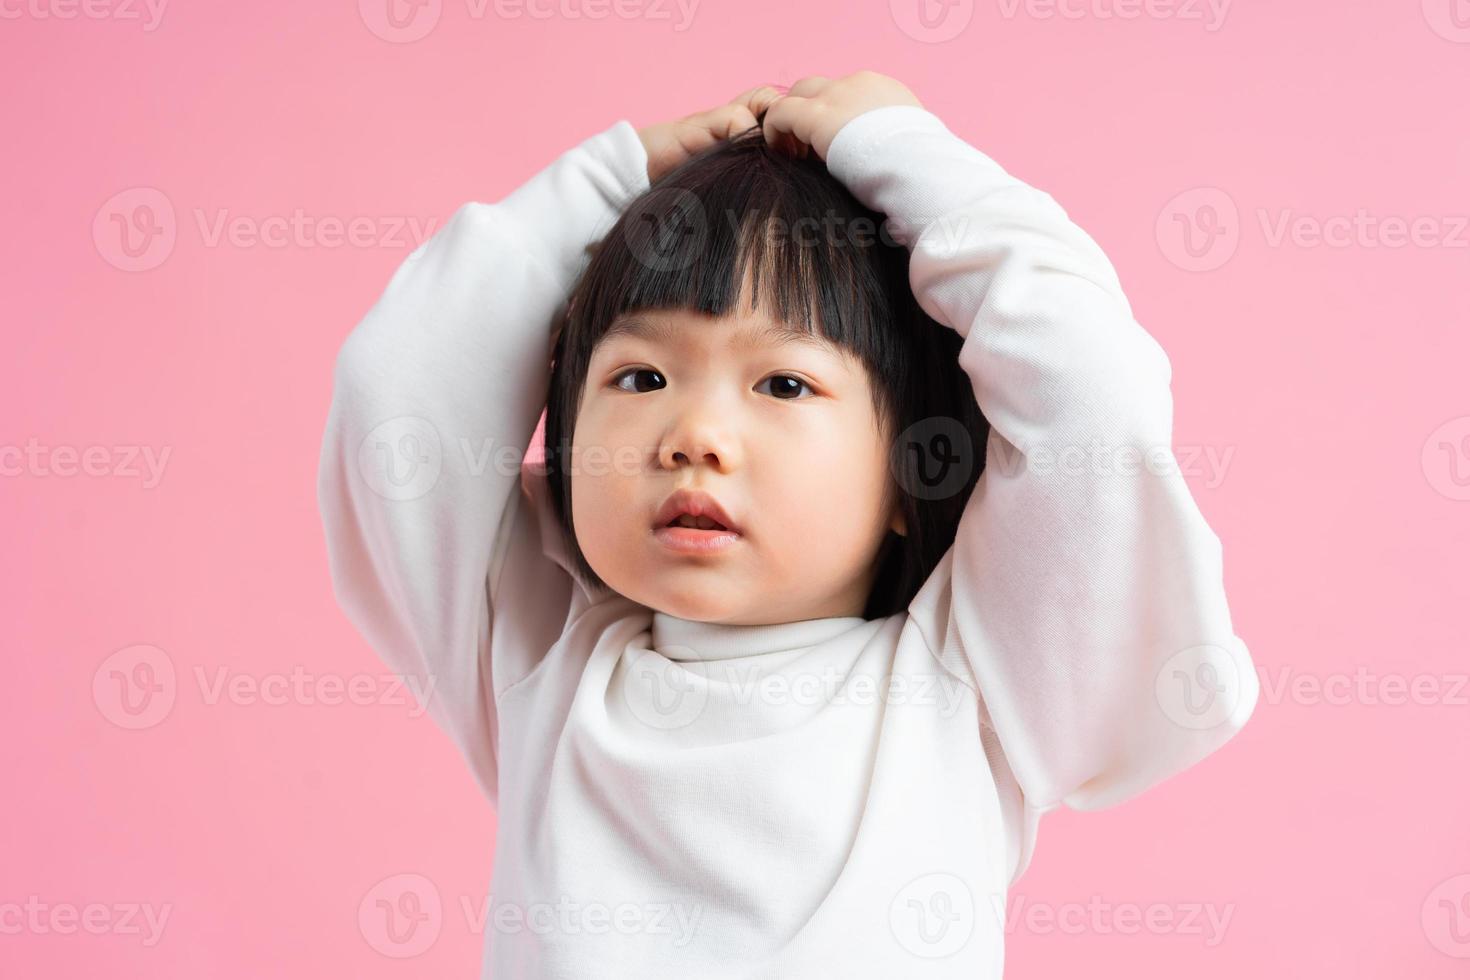 lovely baby girl portrait, isolated on pink background photo